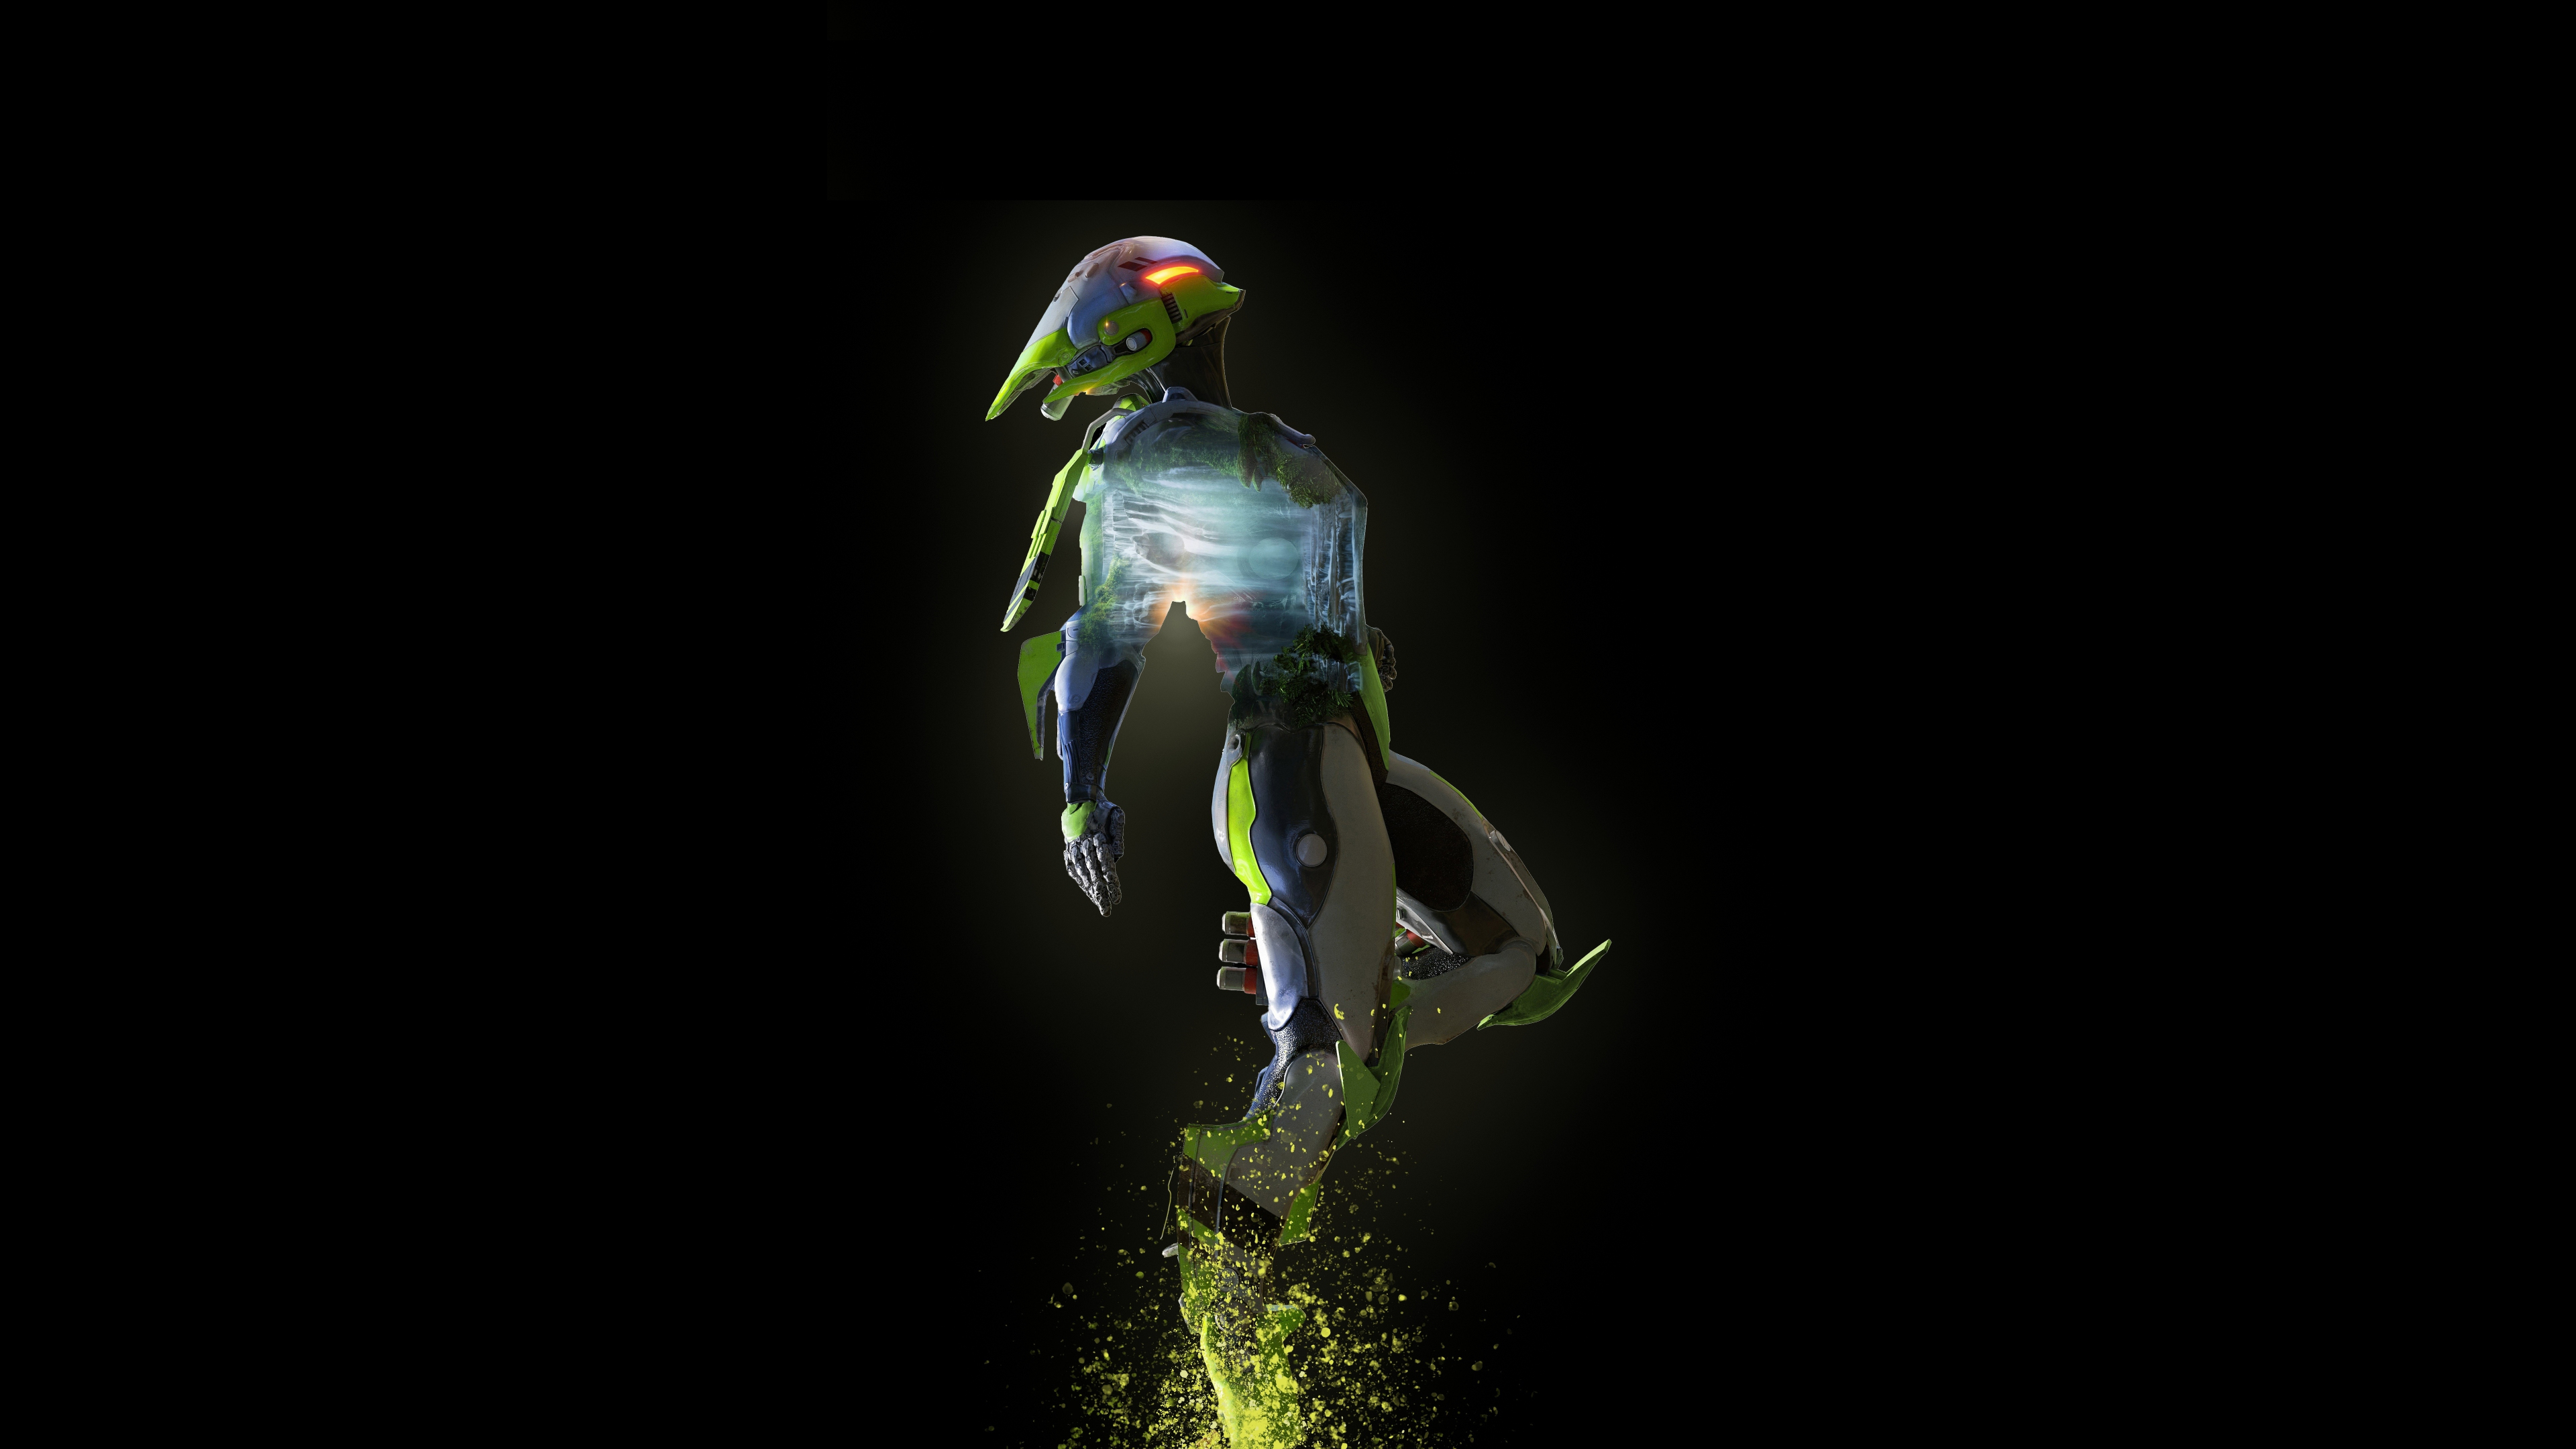 Download wallpaper 3840x2160 green armor suit, anthem, minimal, game 4k  wallpaper, uhd wallpaper, 16:9 widescreen 3840x2160 hd background, 18654